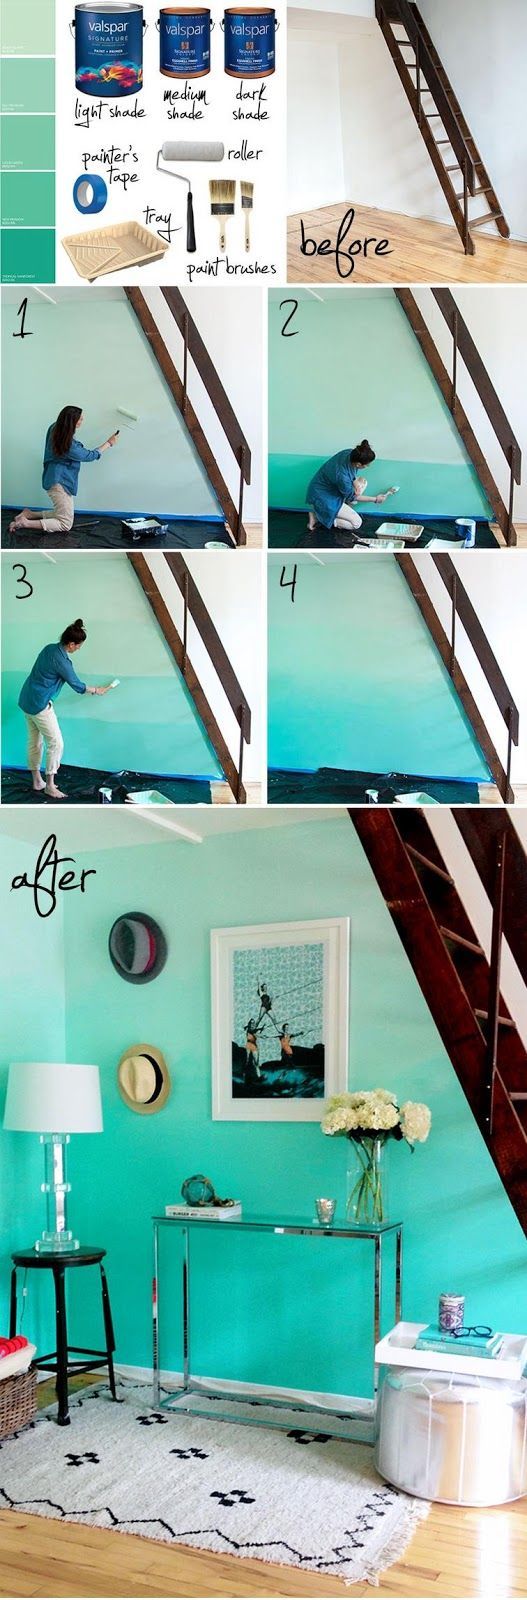 Make your home stylish from the floor to ceiling with a freshly painted feeling!